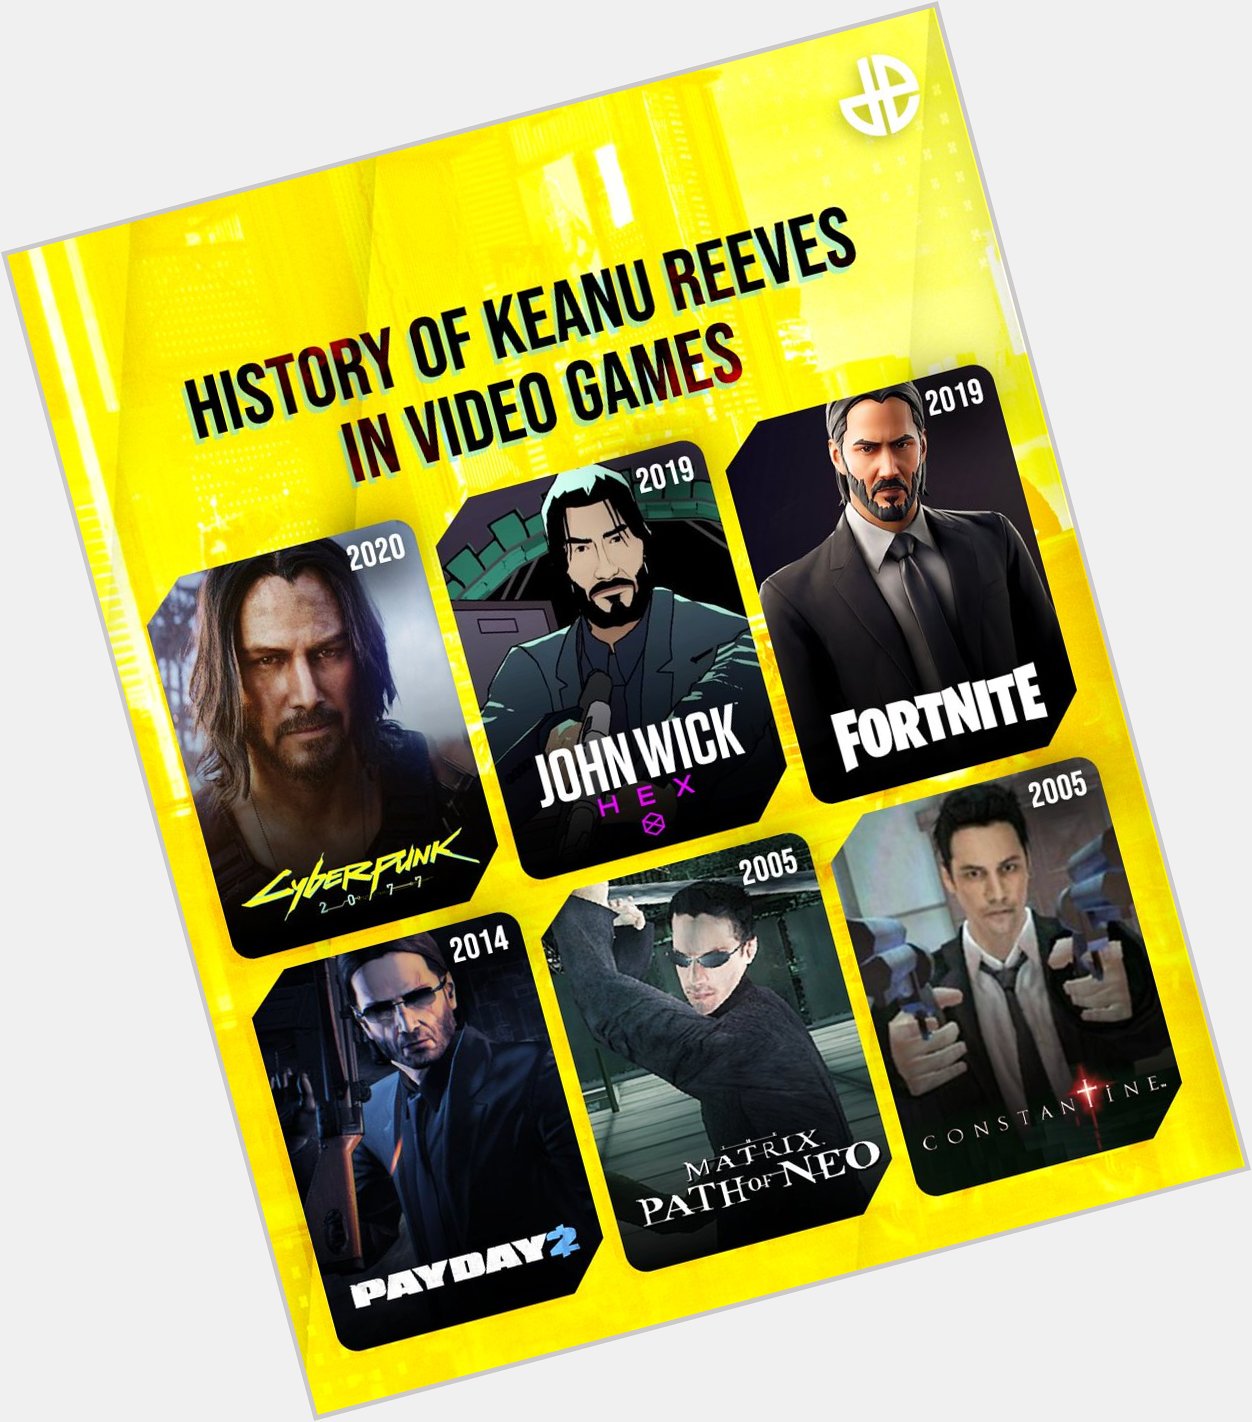 Happy Birthday to Keanu Reeves! Actor first, gamer second 